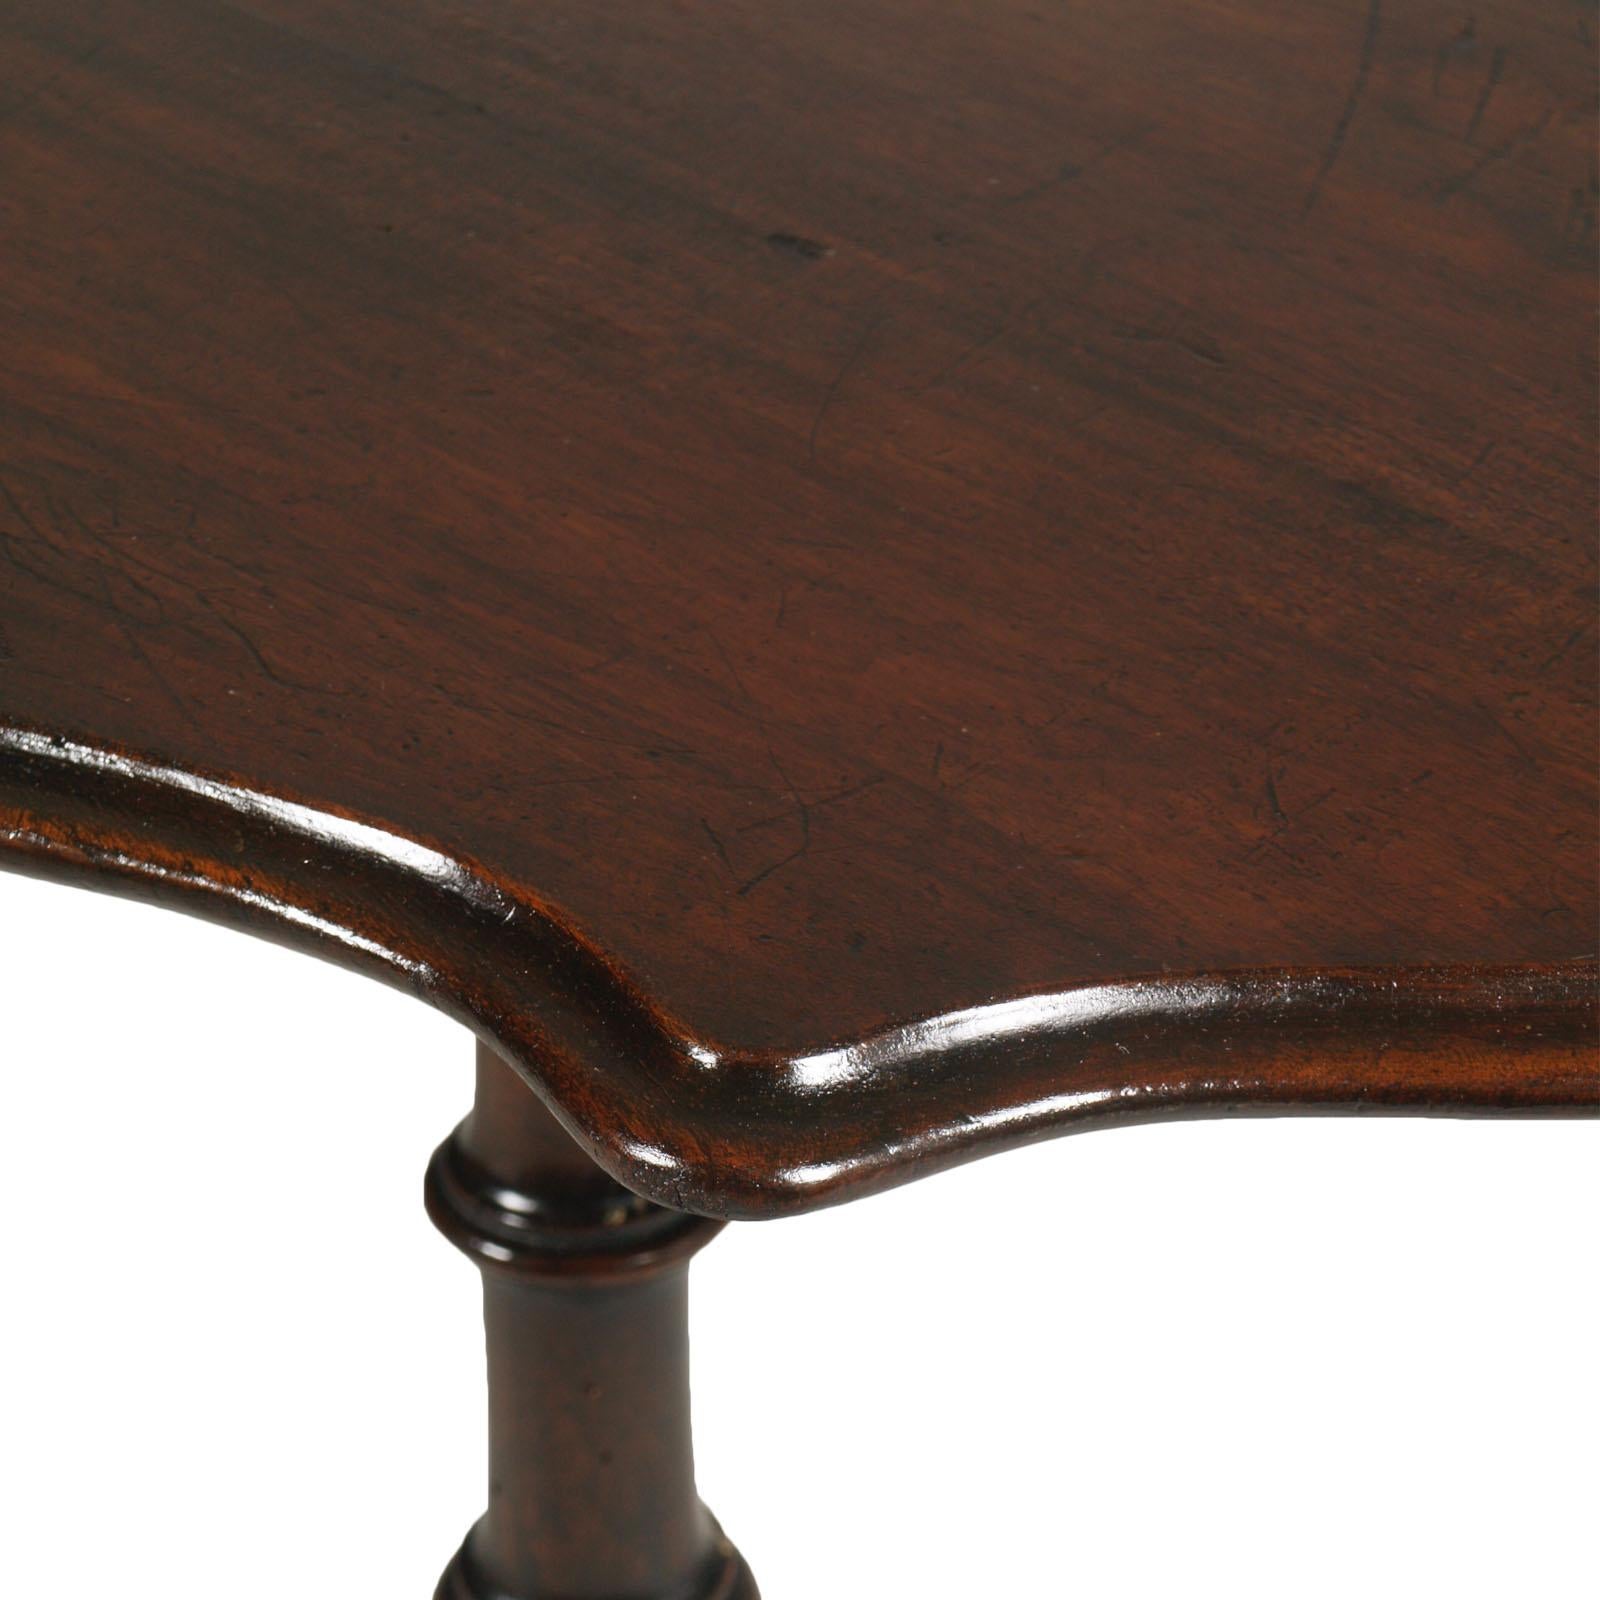 This is an antique Italian rare and elegant tilt-top table, side table, coffee table in carved and turned solid walnut find in Asolo -Treviso, restored and wax polished.

This table is raised upon a four legs, supporting a turned column.
The top